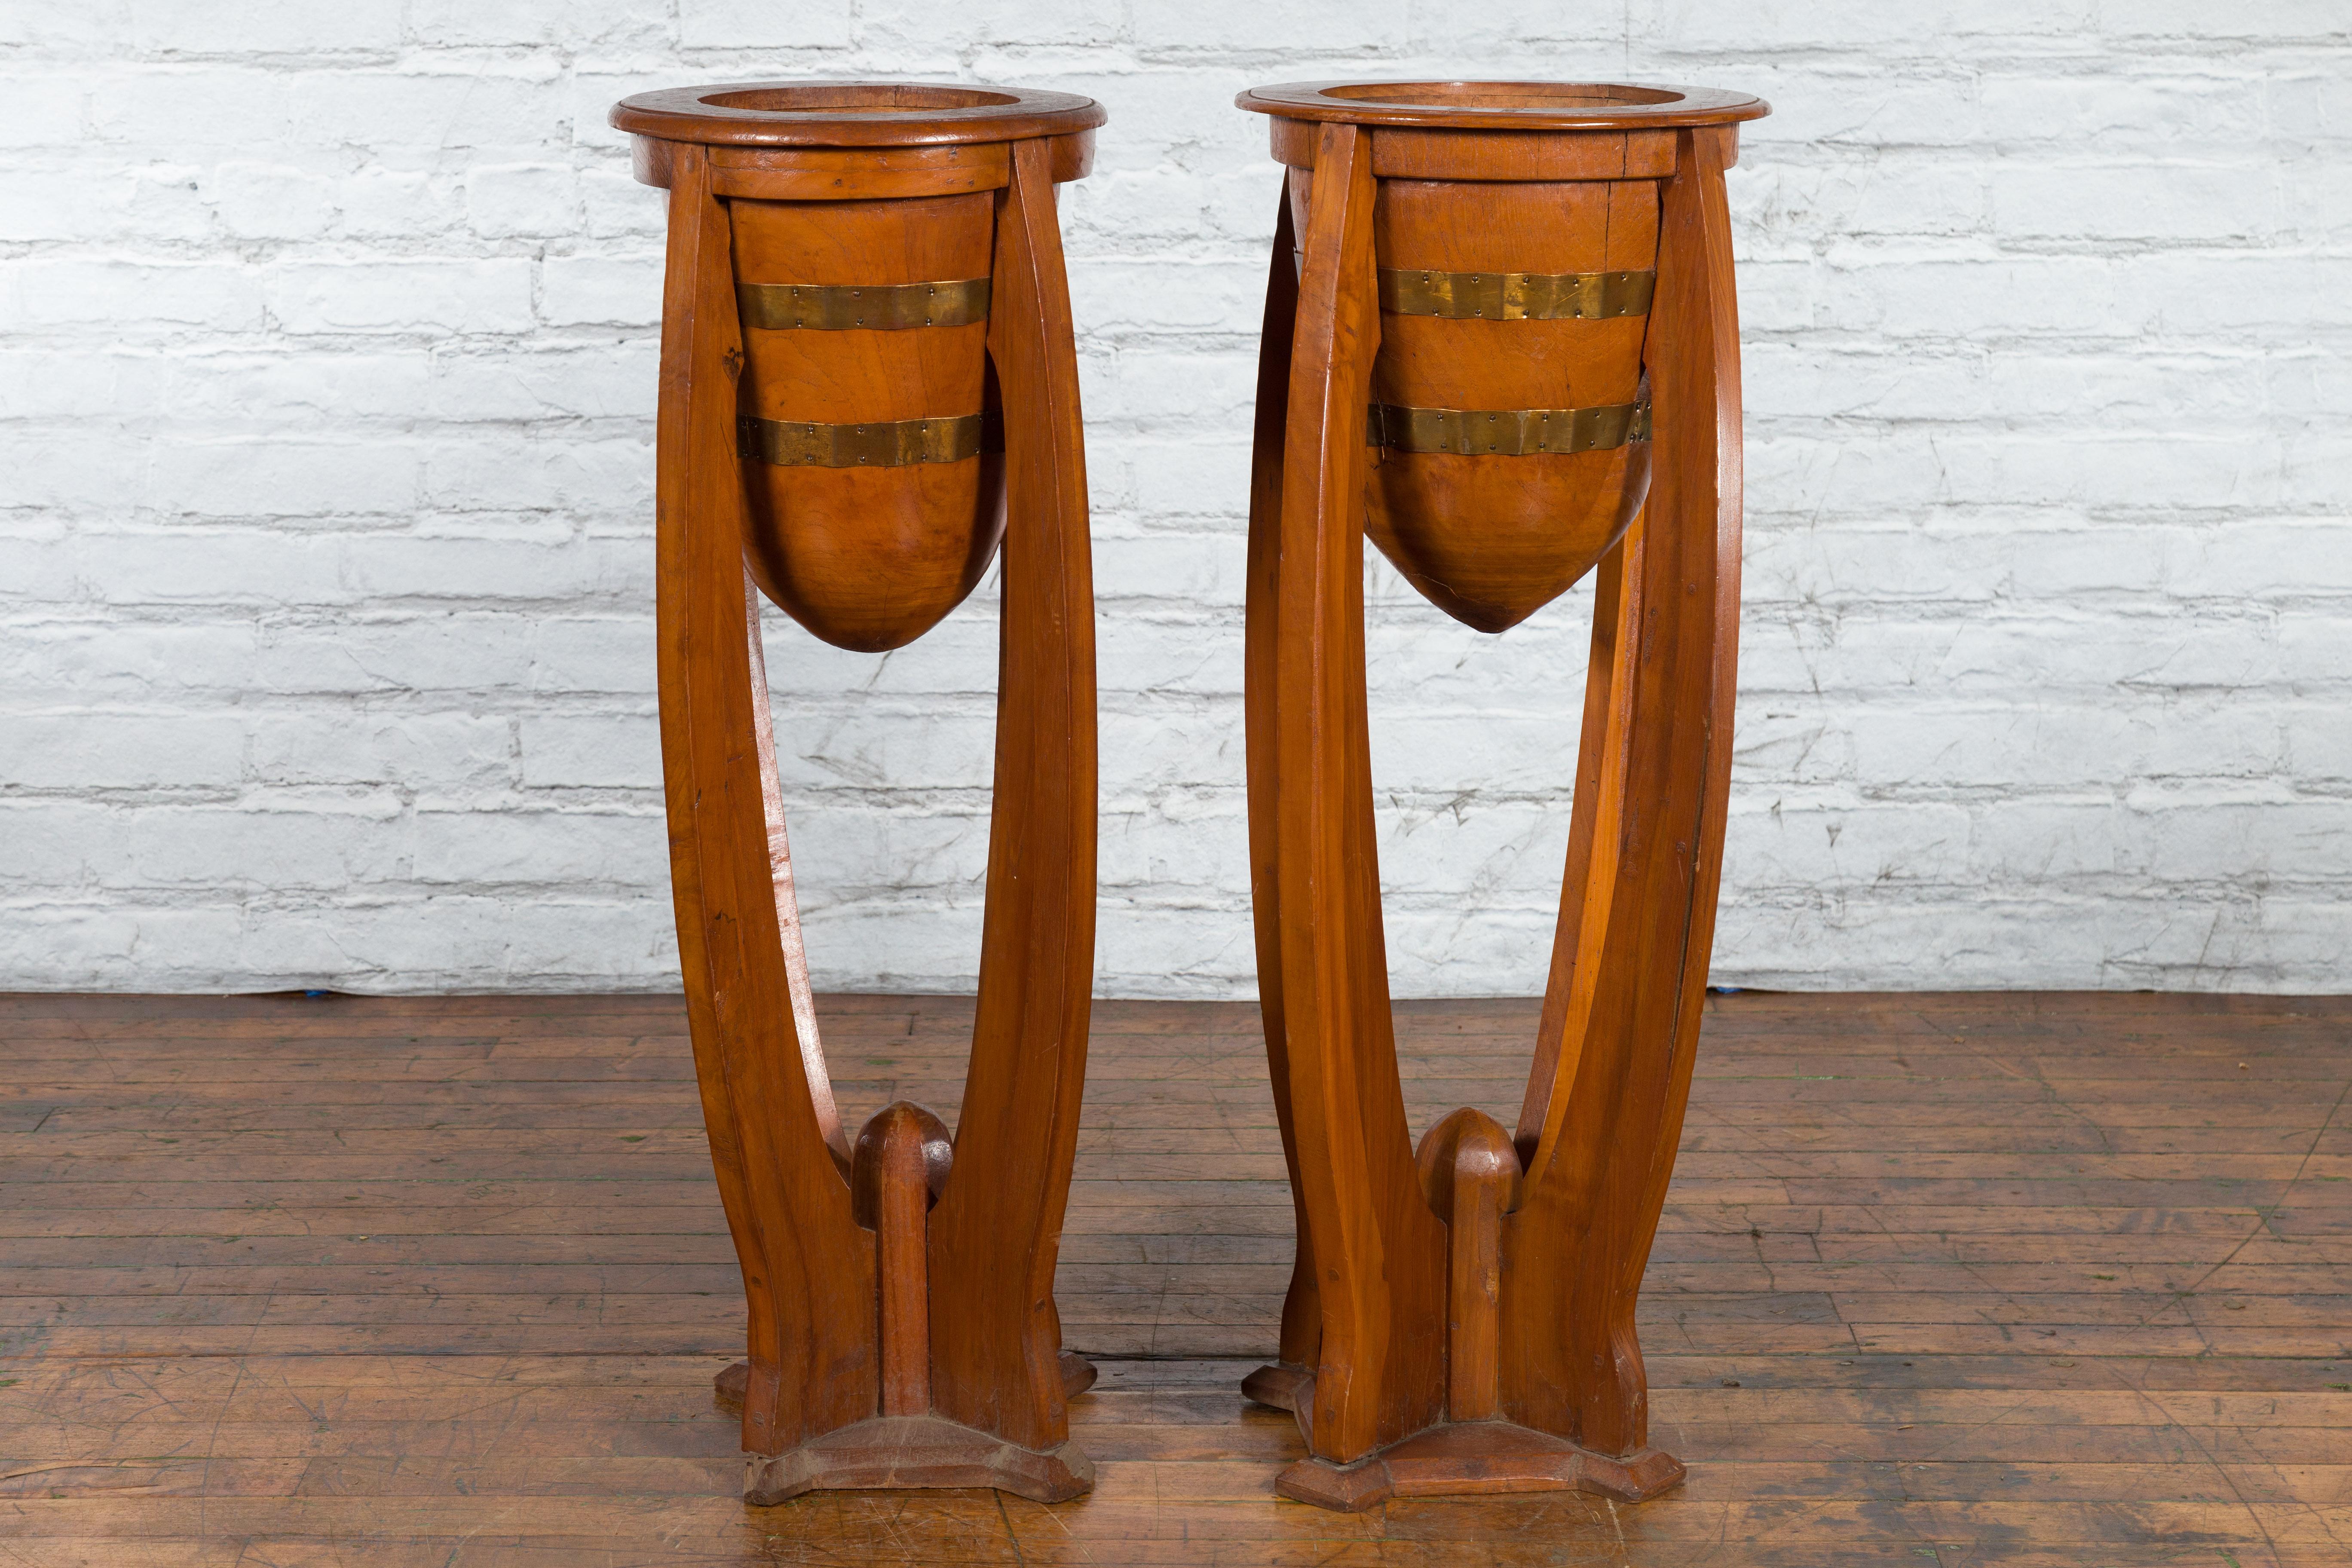 Large Pair of Javanese Art Deco Style Teak Wood Plant Stands with Brass Braces For Sale 8